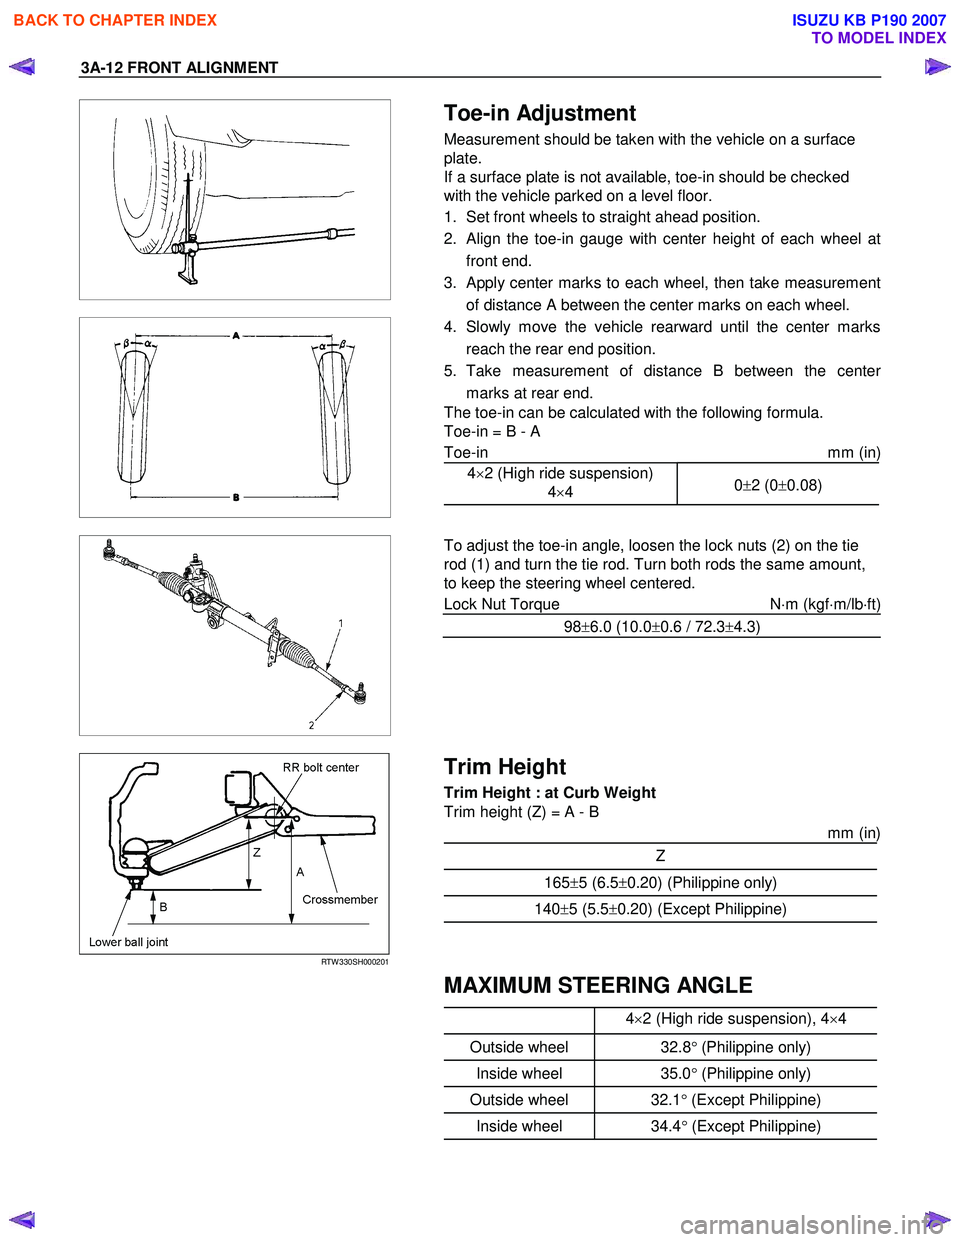 ISUZU KB P190 2007  Workshop Owners Manual 3A-12 FRONT ALIGNMENT 
 
  
 
 
 
 Toe-in Adjustment 
Measurement should be taken with the vehicle on a surface  
plate. 
If a surface plate is not available, toe-in should be checked 
with the vehicl